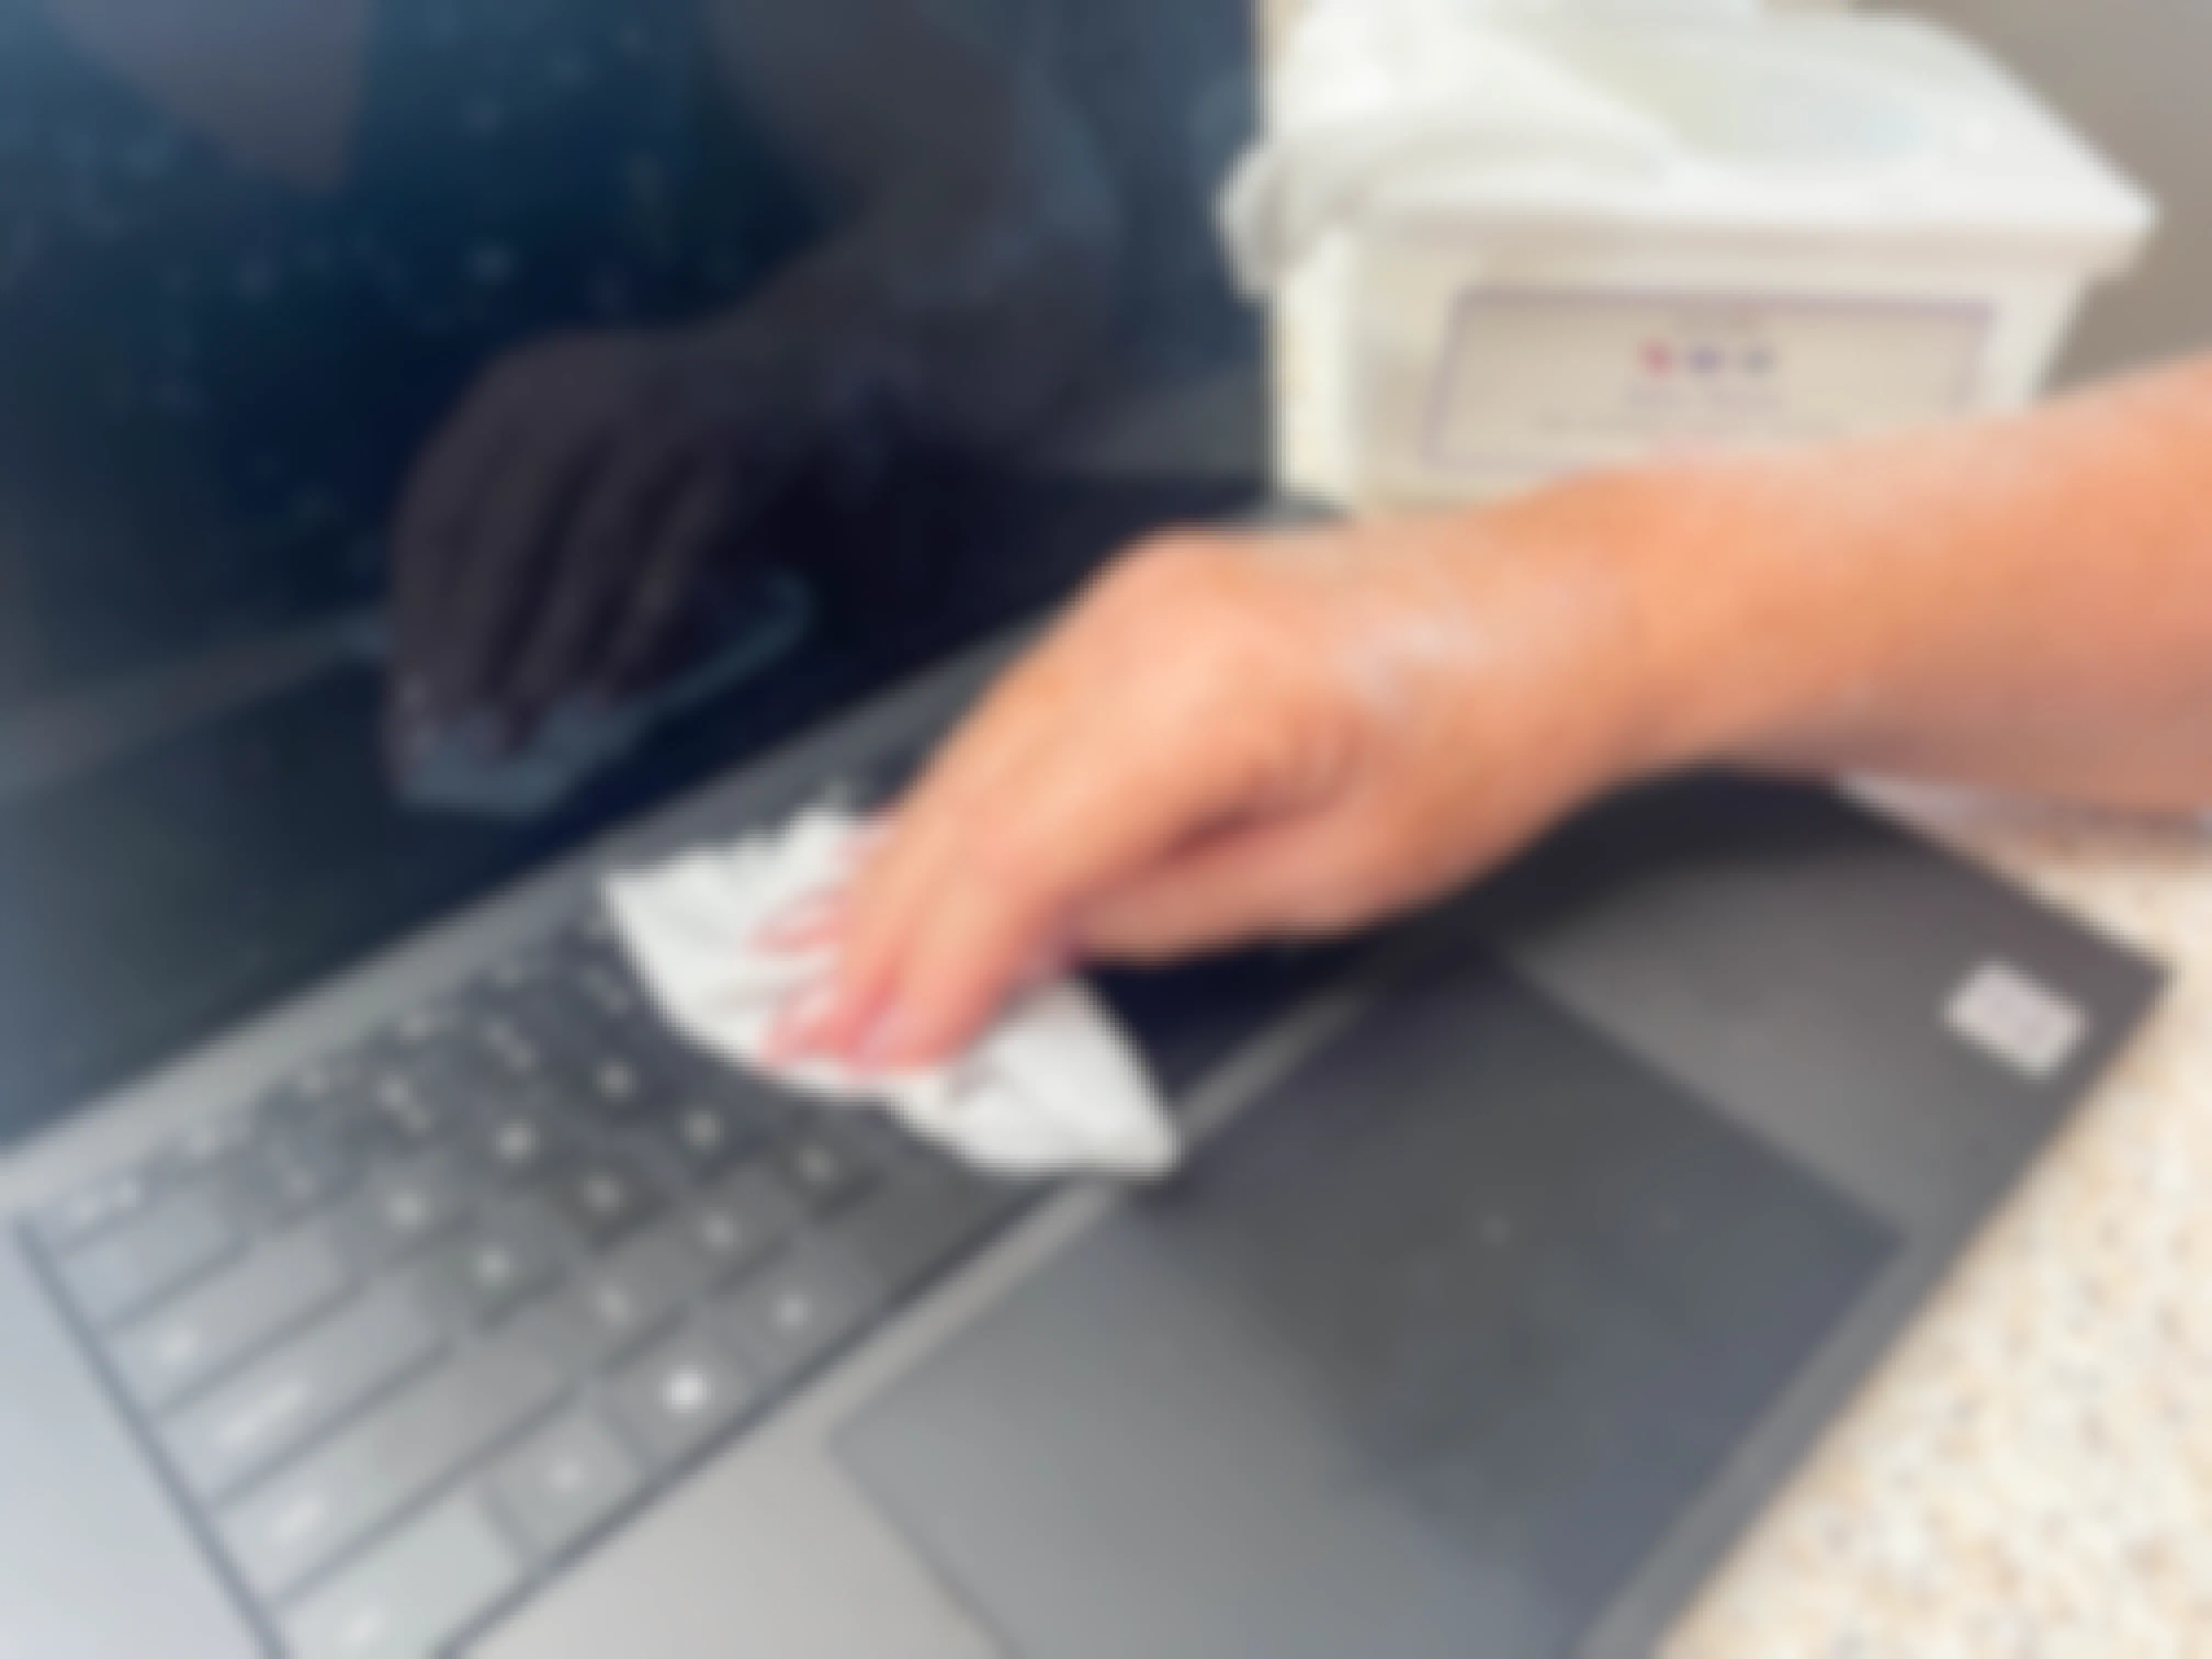 a woman using a baby wipe to wipe up dust on keyboard